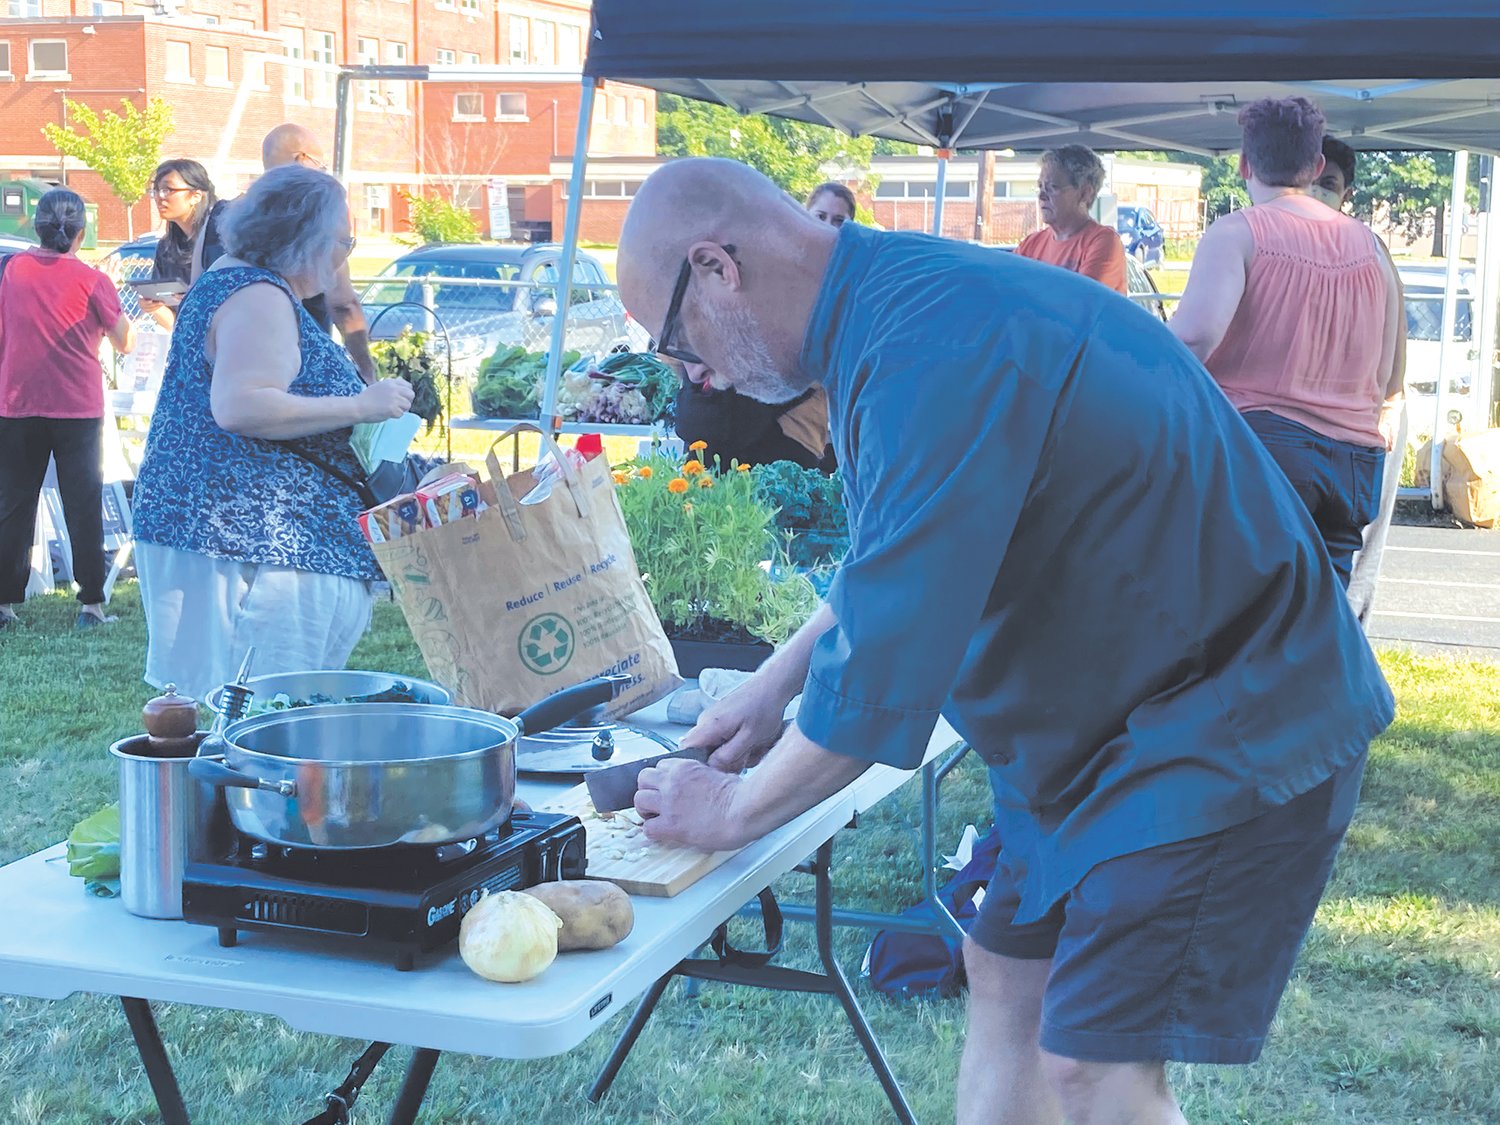 SIMPLE EATS: Chef William J. Lendway from Johnson and Wales University showed Cranston residents what they could make with the food that they picked out at the July 7 farmer’s market. (Herald photo)